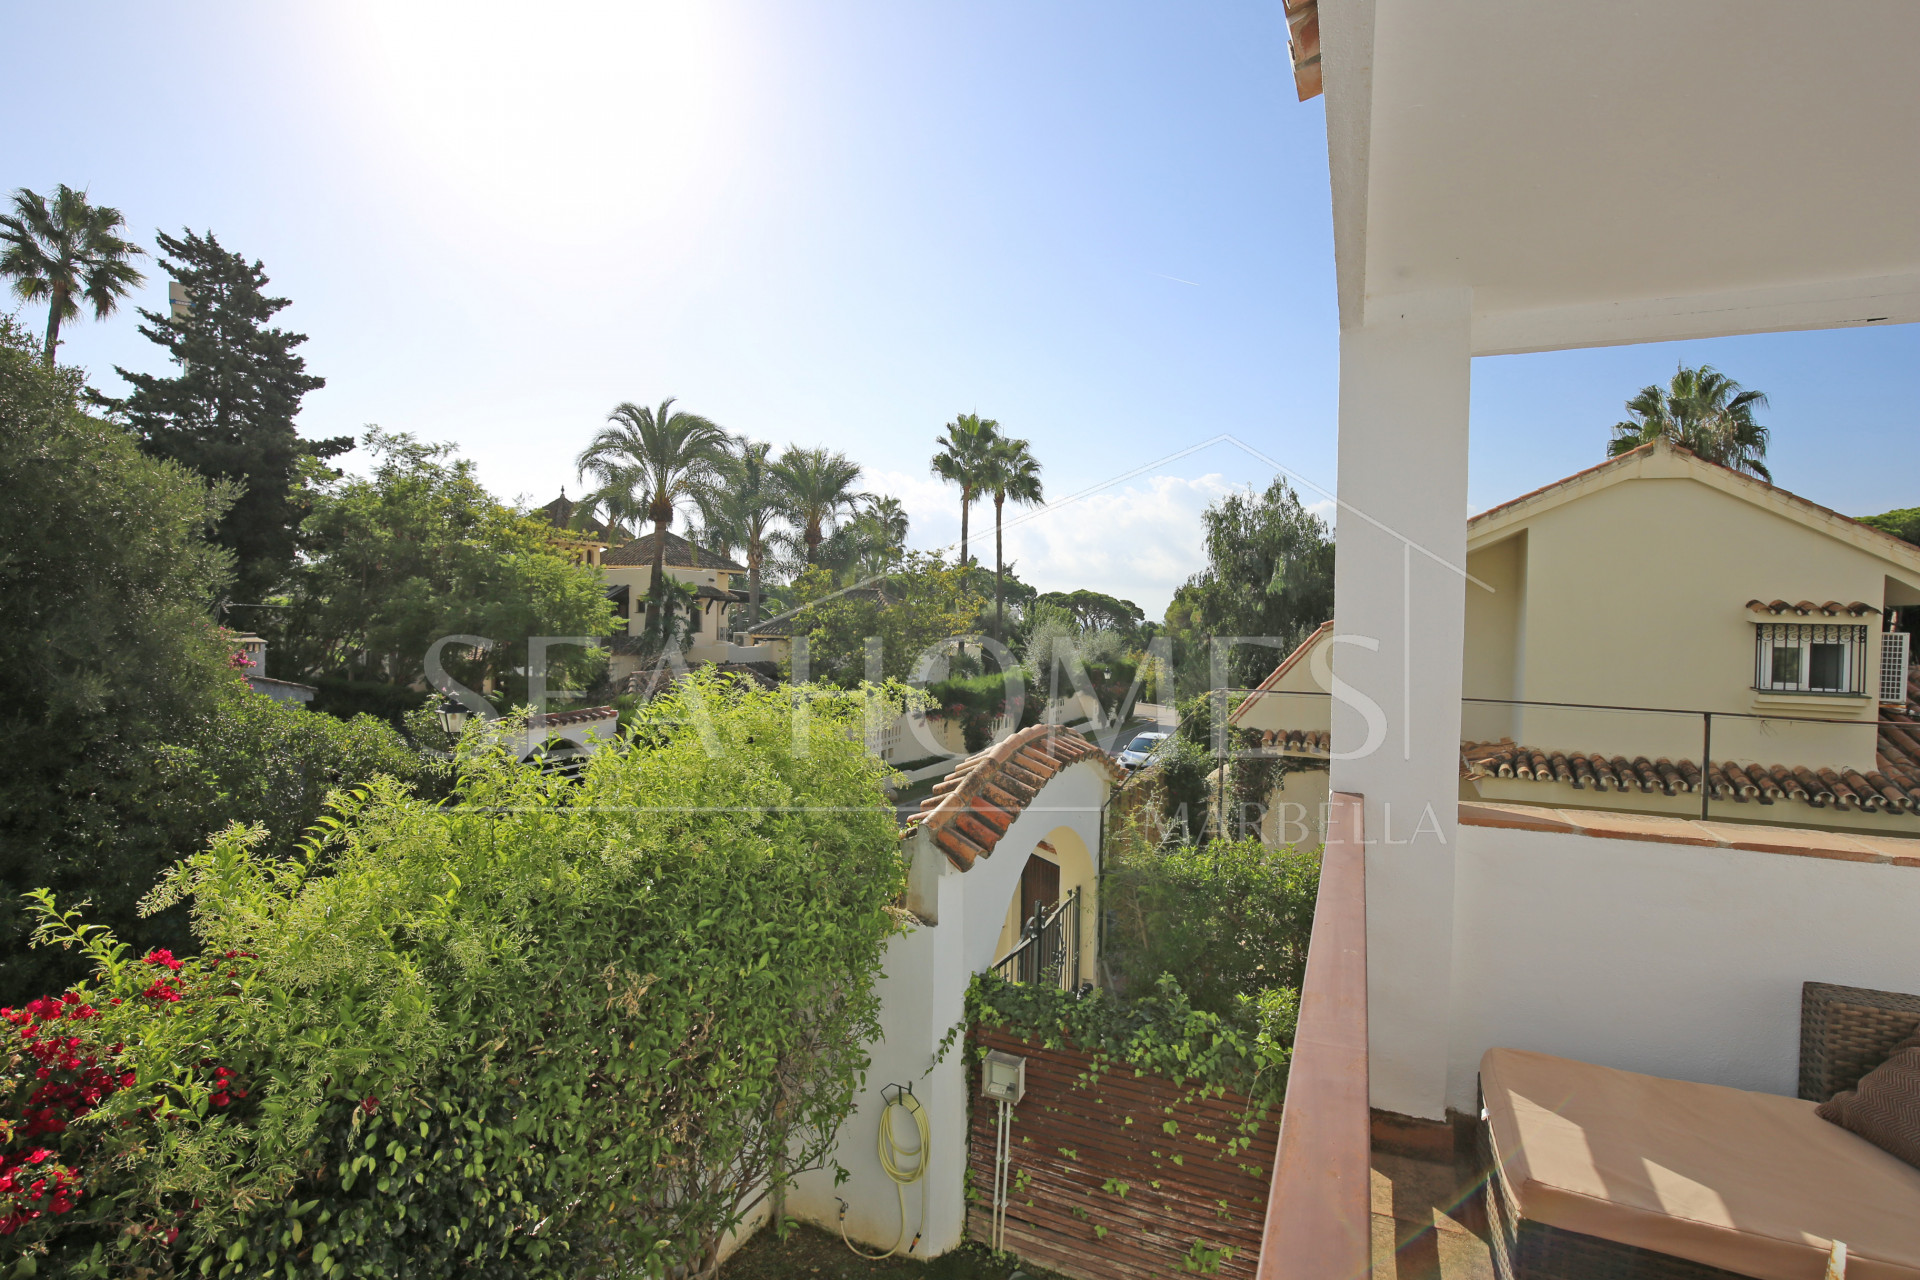 Spectacular eight bedroom, beachside villa in Casablanca on the Golden Mile - Possible Project